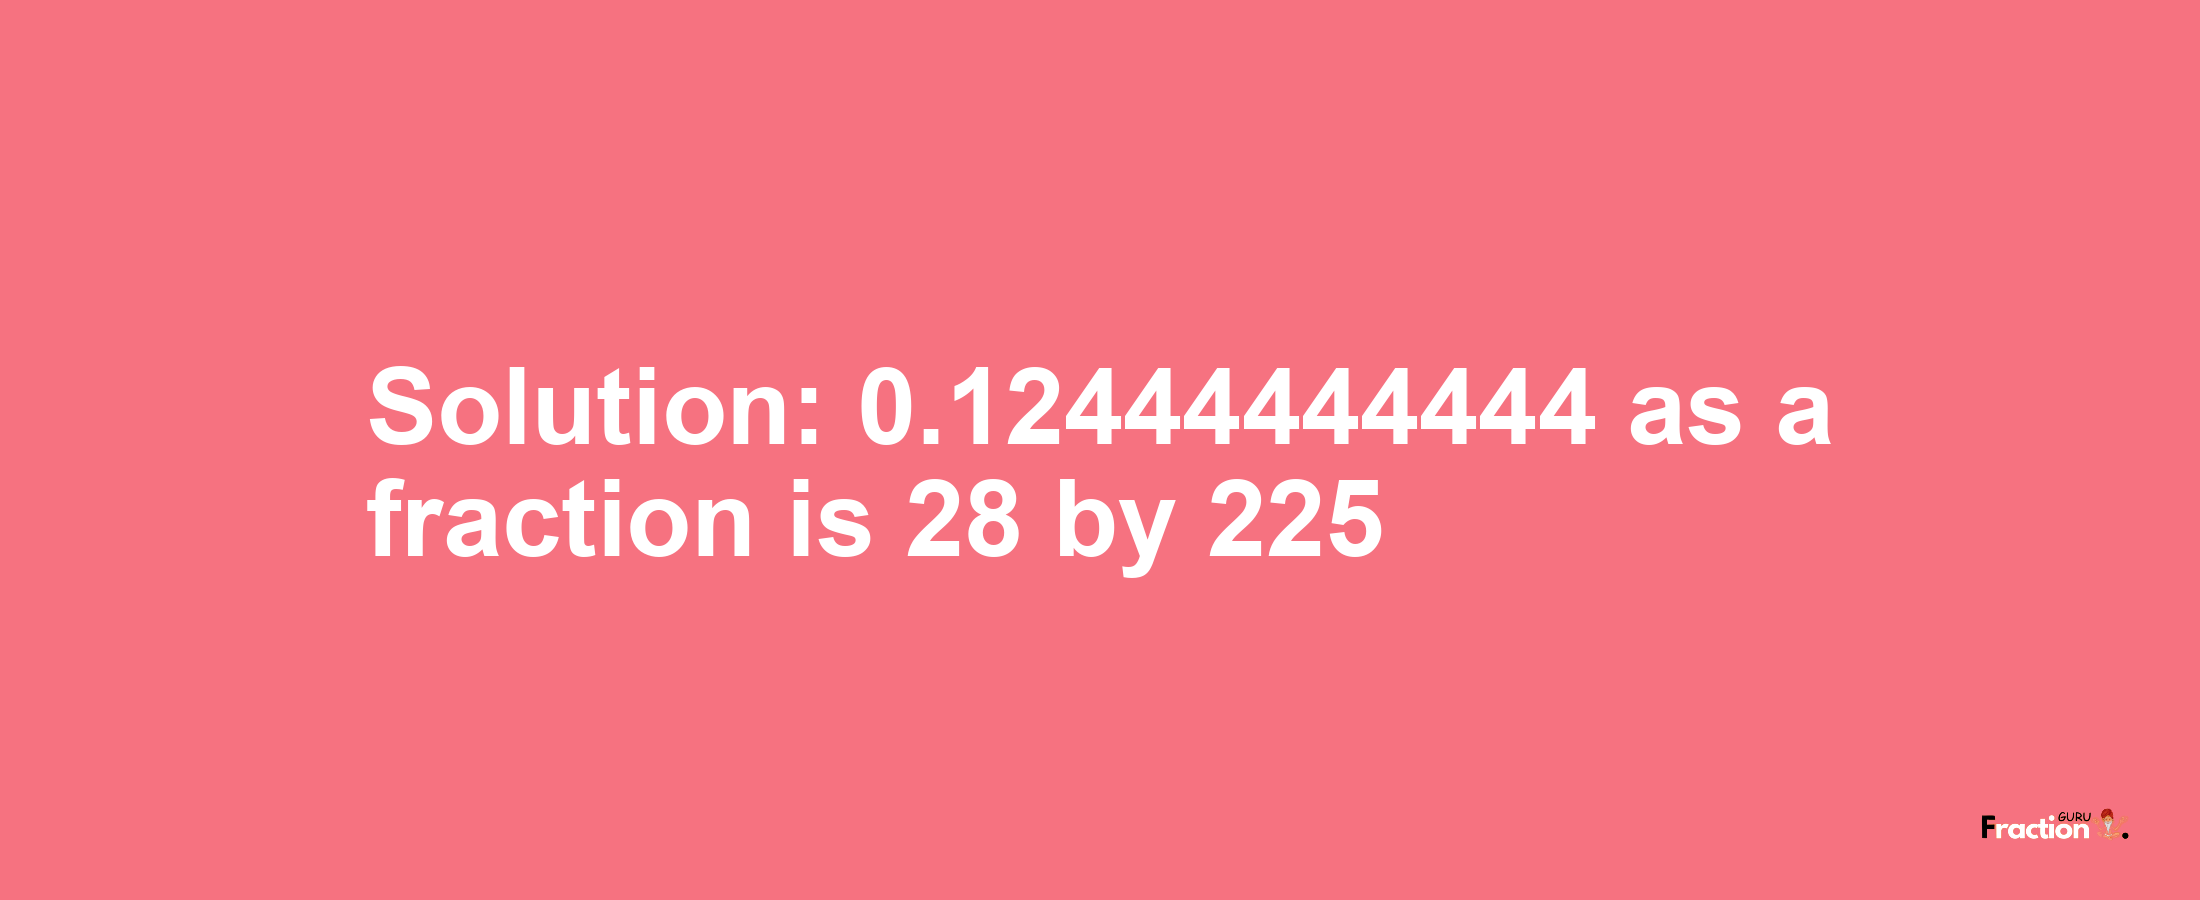 Solution:0.12444444444 as a fraction is 28/225